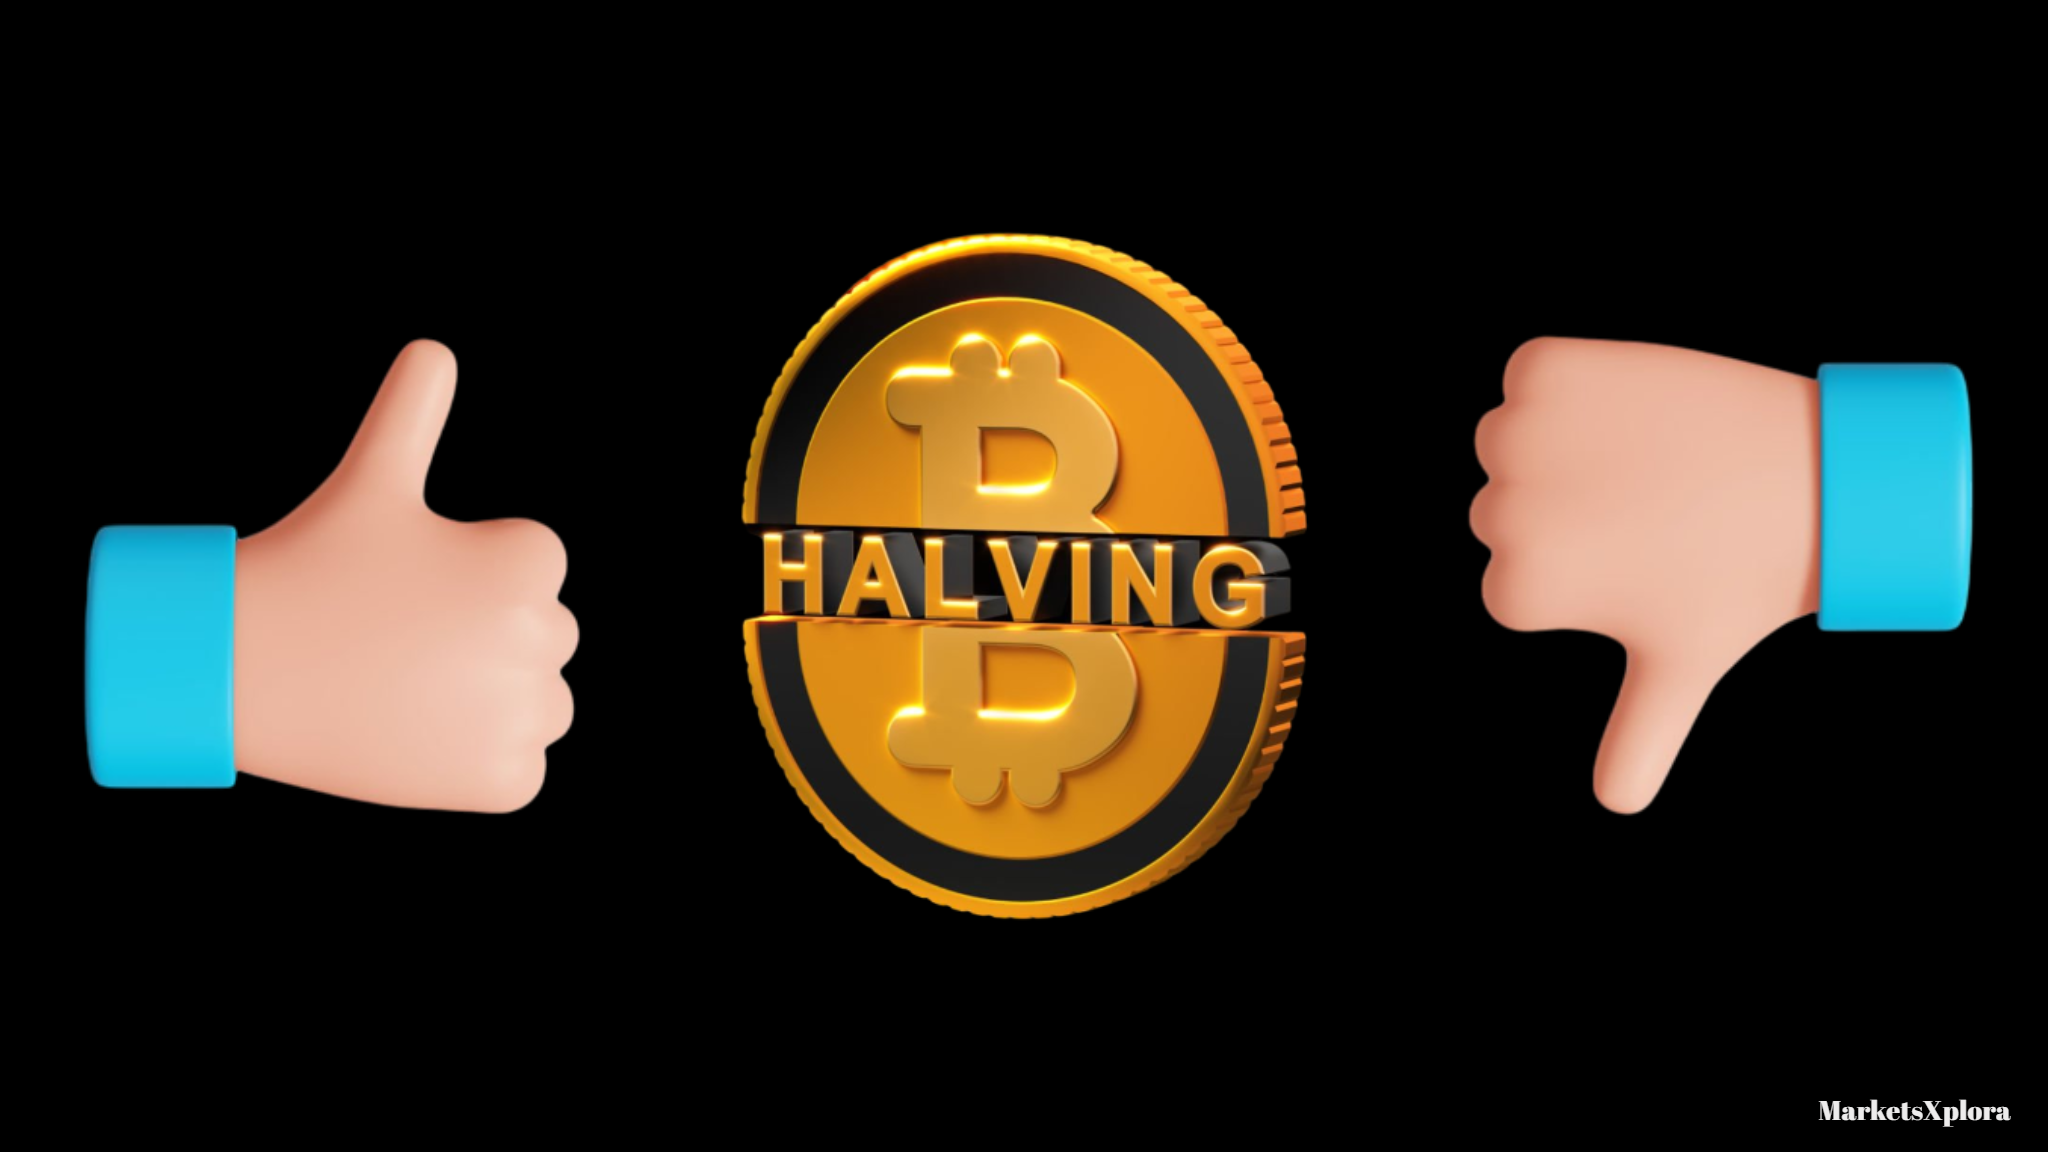 Is Bitcoin Halving Good or Bad? Prepare for the next halving event by understanding its multifaceted impact on Bitcoin's price, network security, and the broader cryptocurrency landscape.